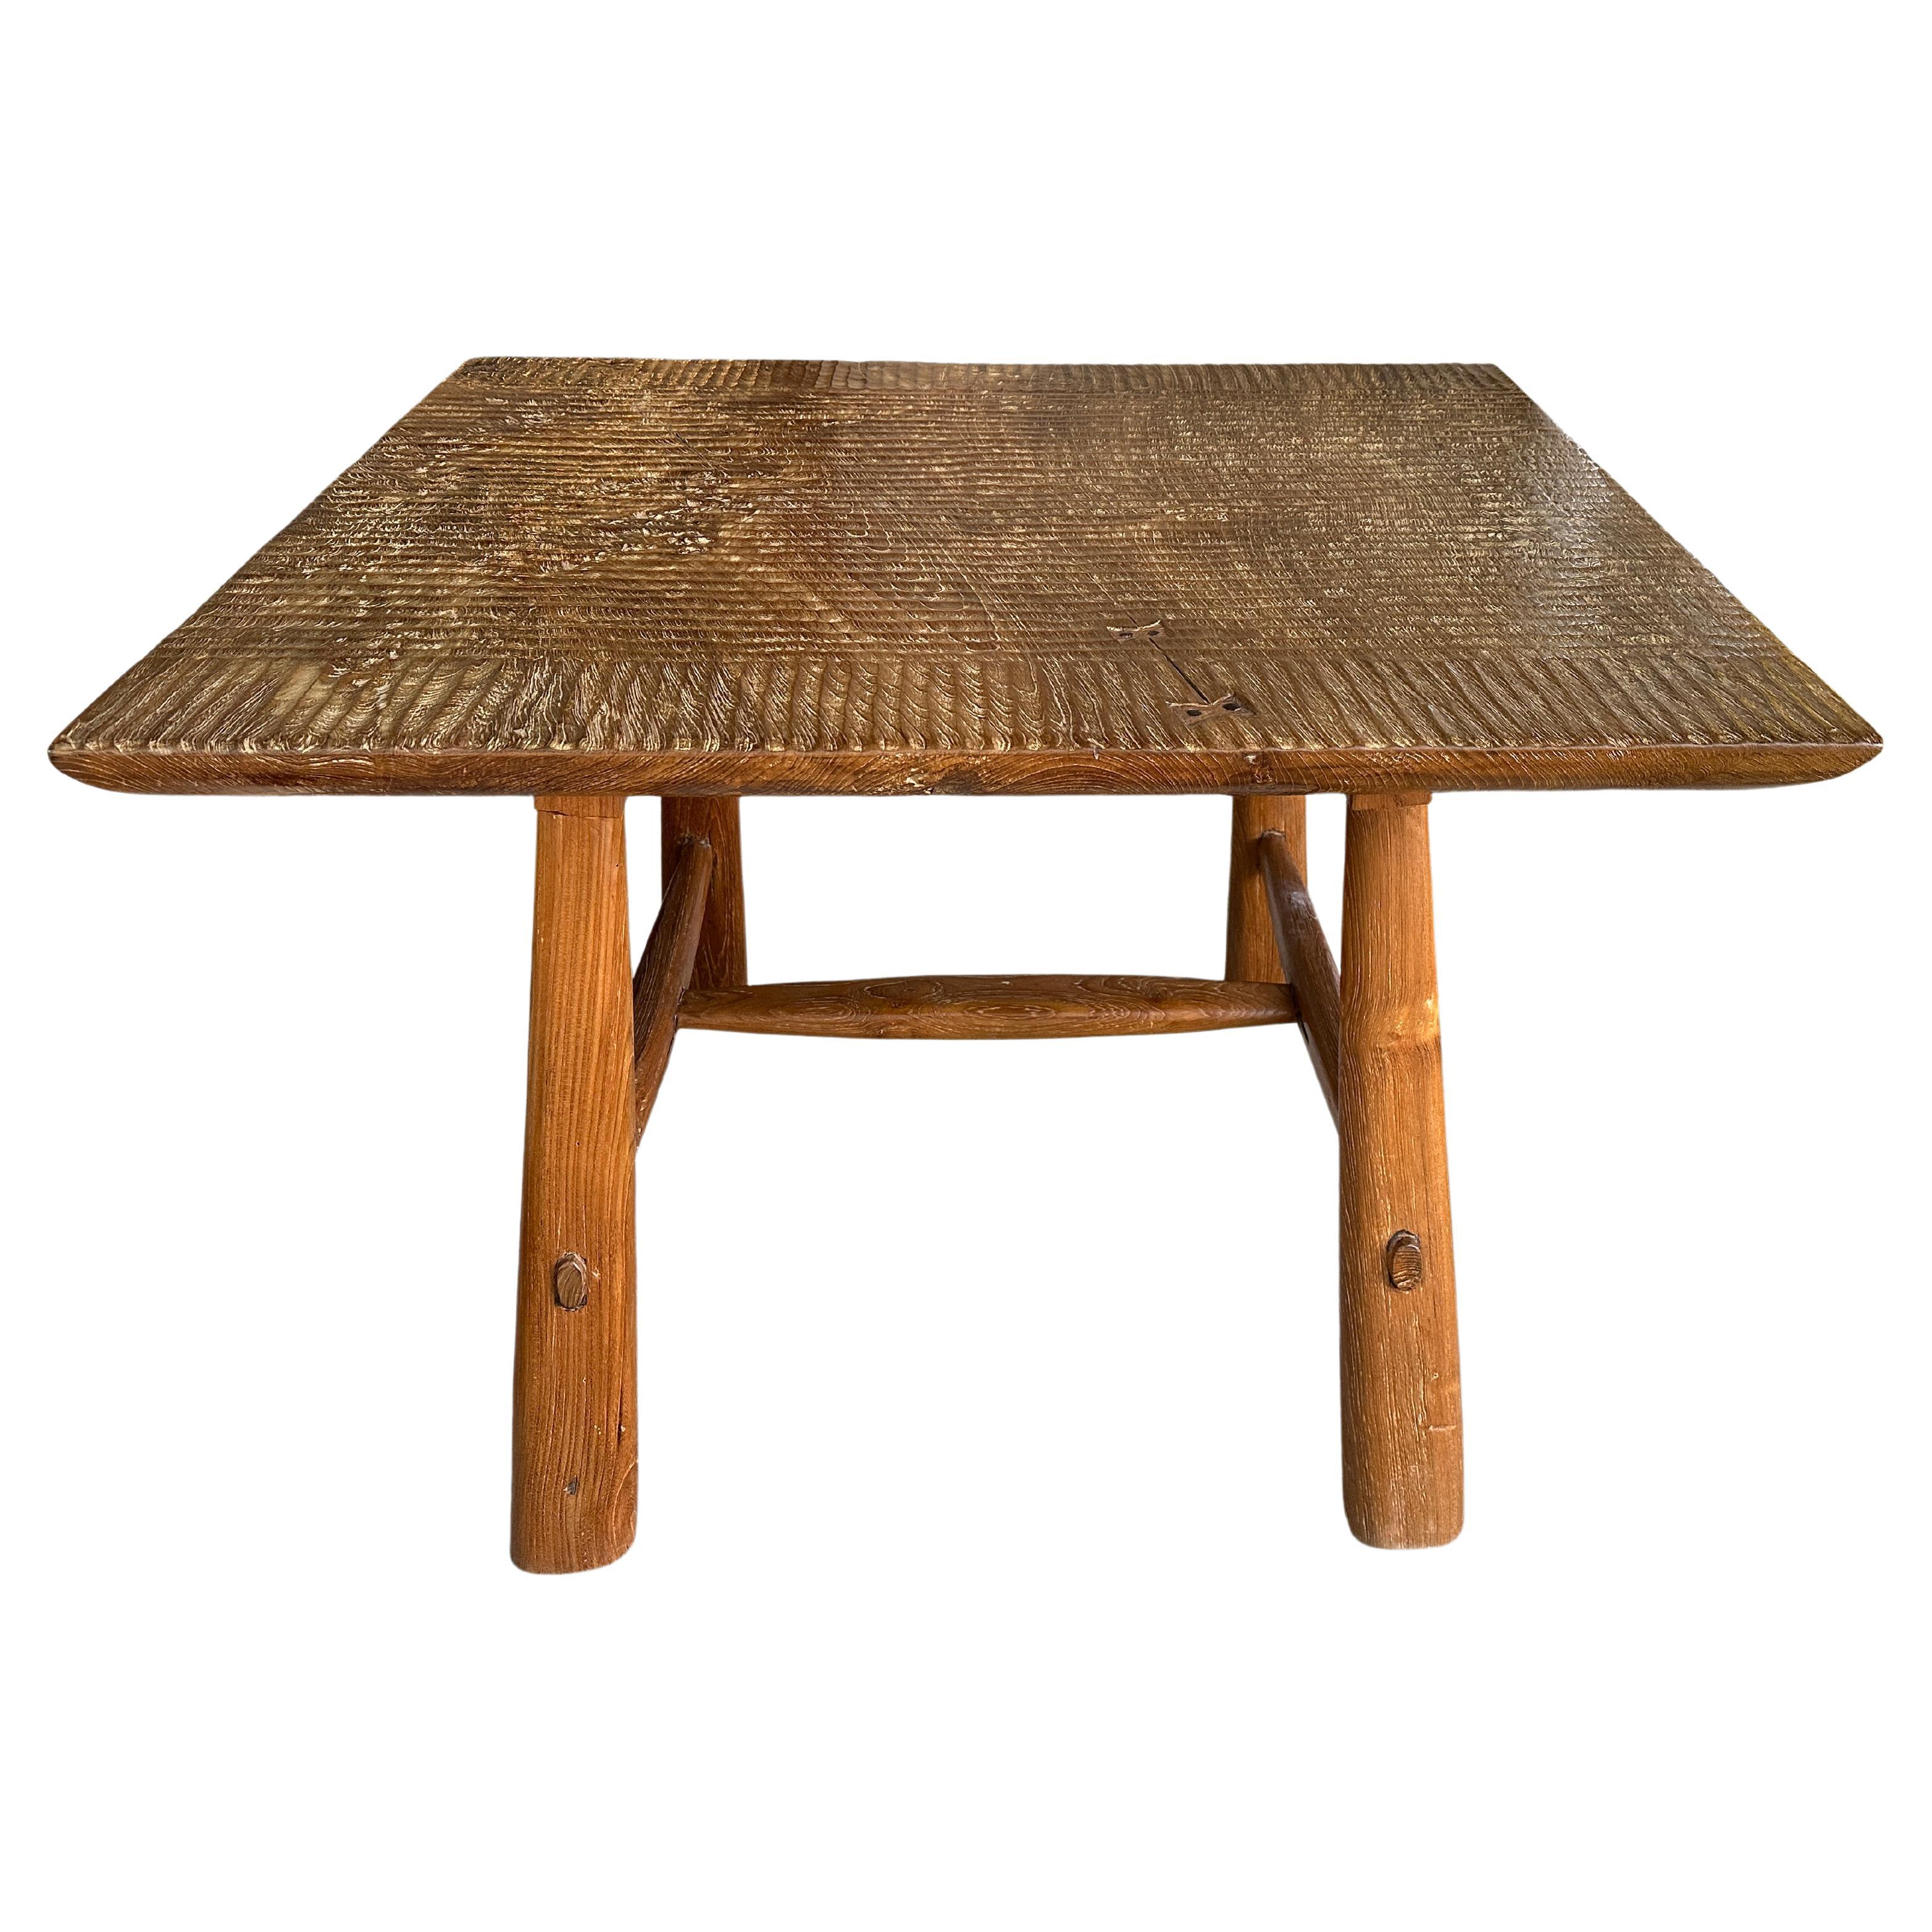 Andrianna Shamaris Hand Carved Teak Wood Dining Table, Side Table, Entry Table For Sale